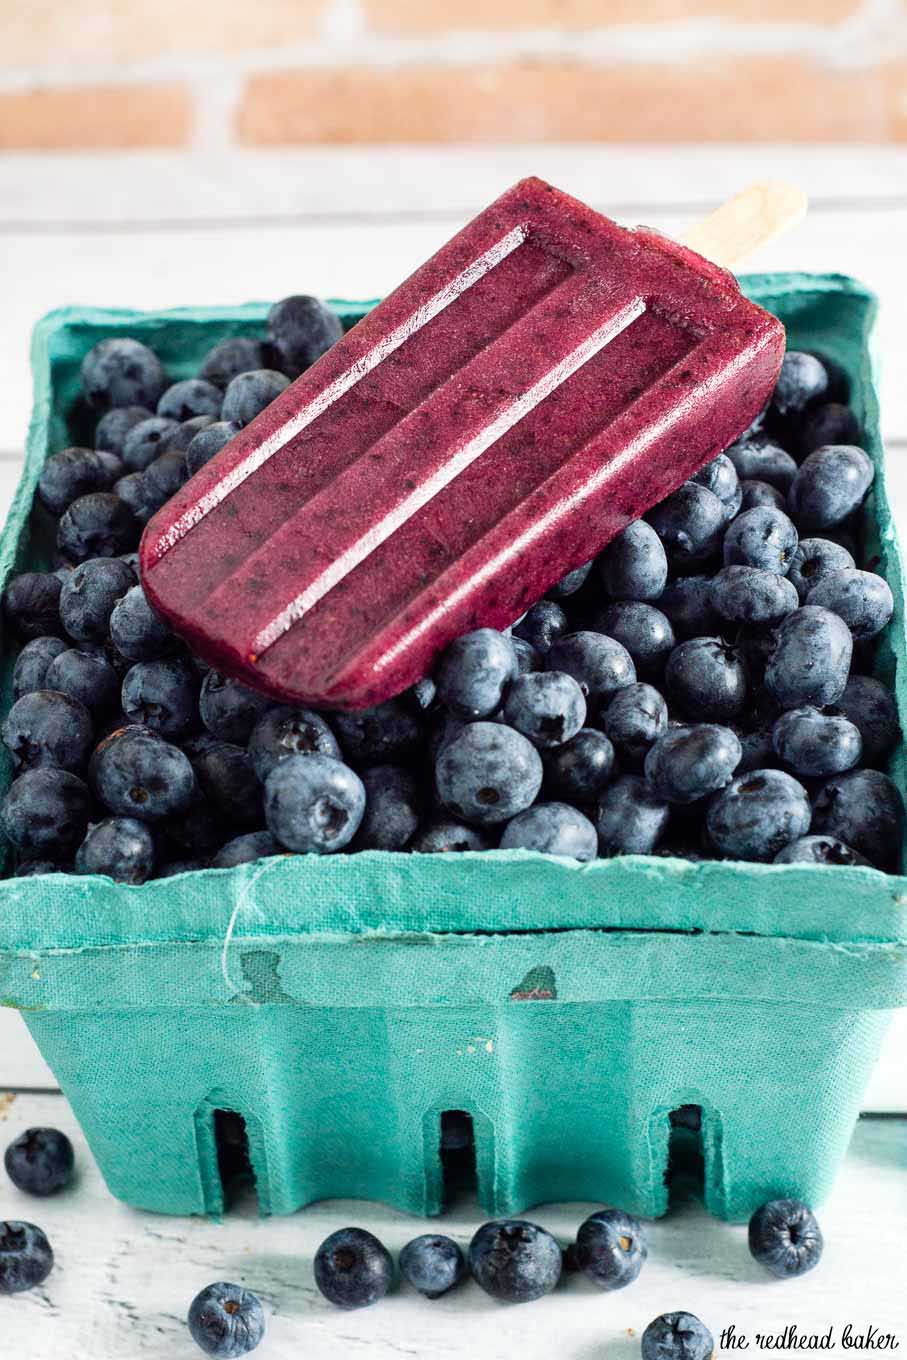 With just four ingredients, these simple frozen blueberry pops deliver intense blueberry flavor. They're perfect for cooling off on a hot summer day!